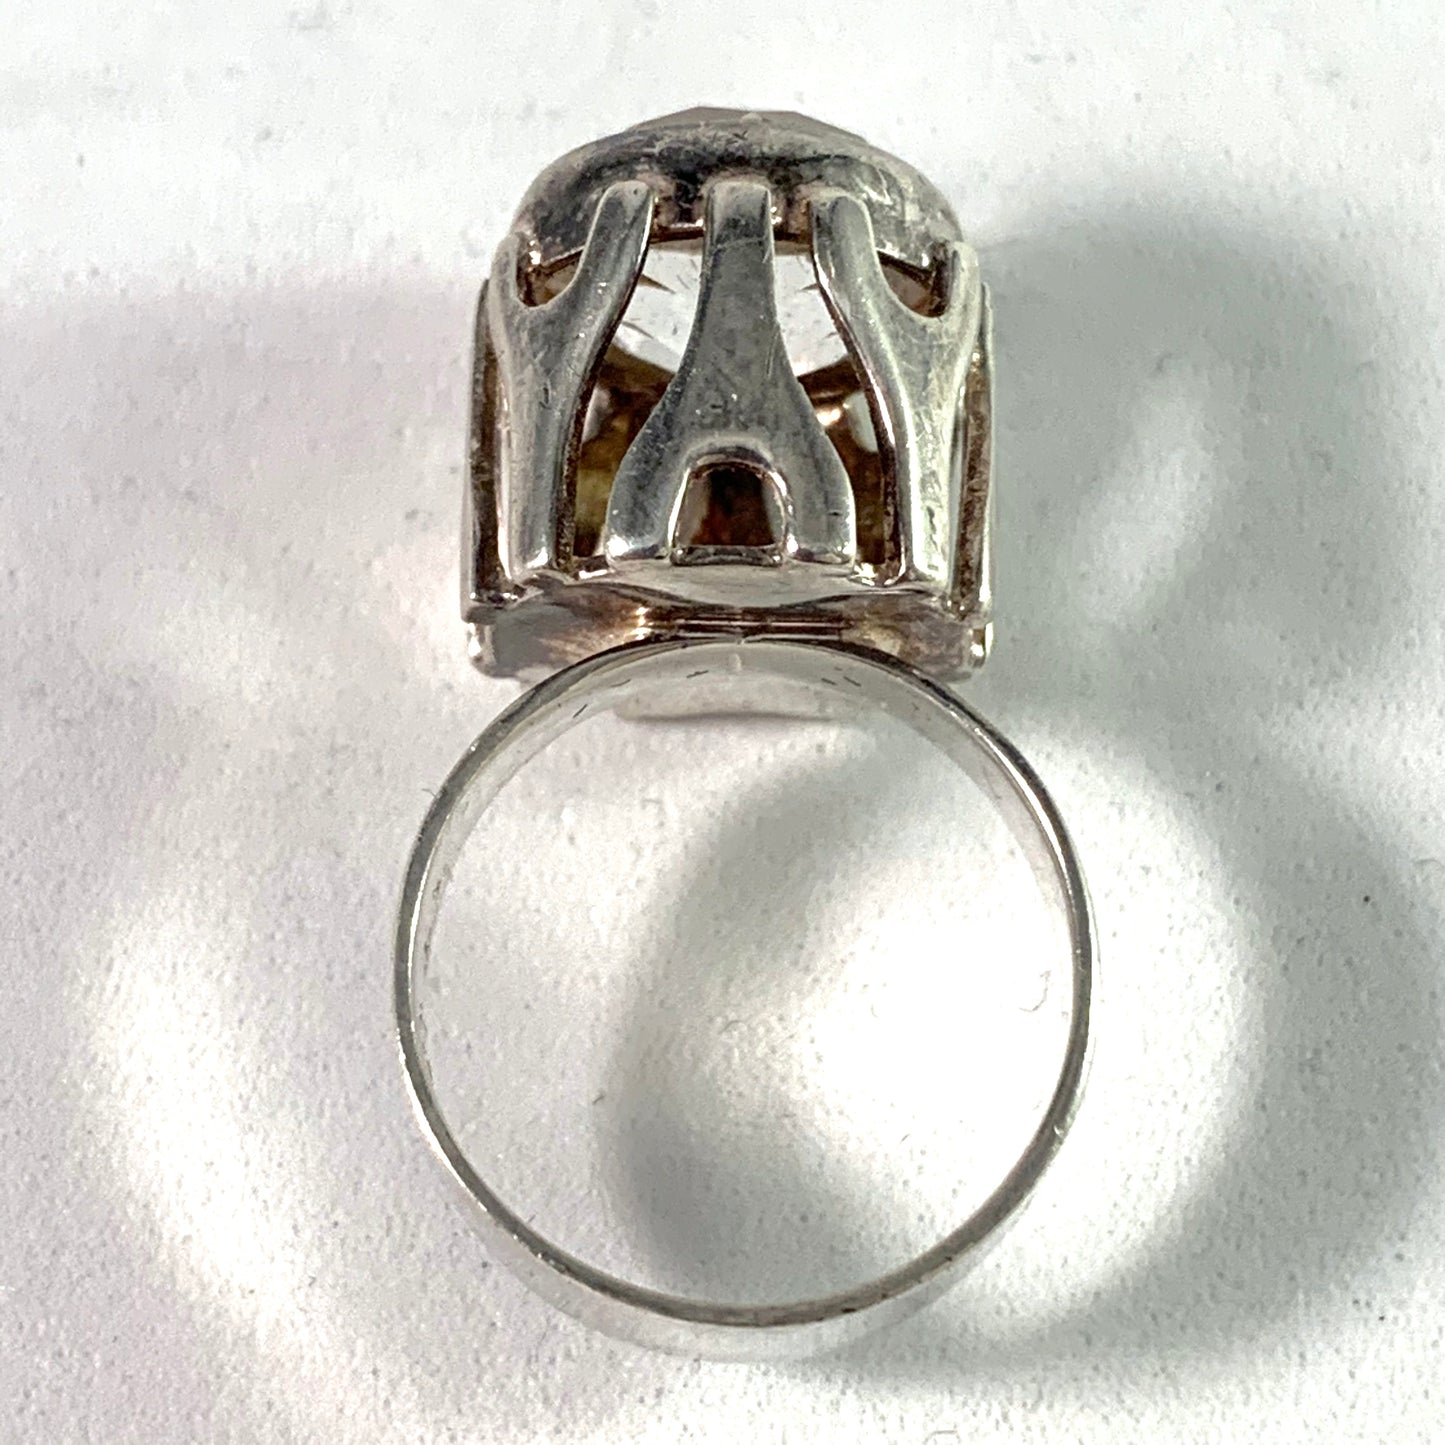 Germany / Austria 1960 Modernist Solid 835 Silver Rock Crystal Ring.